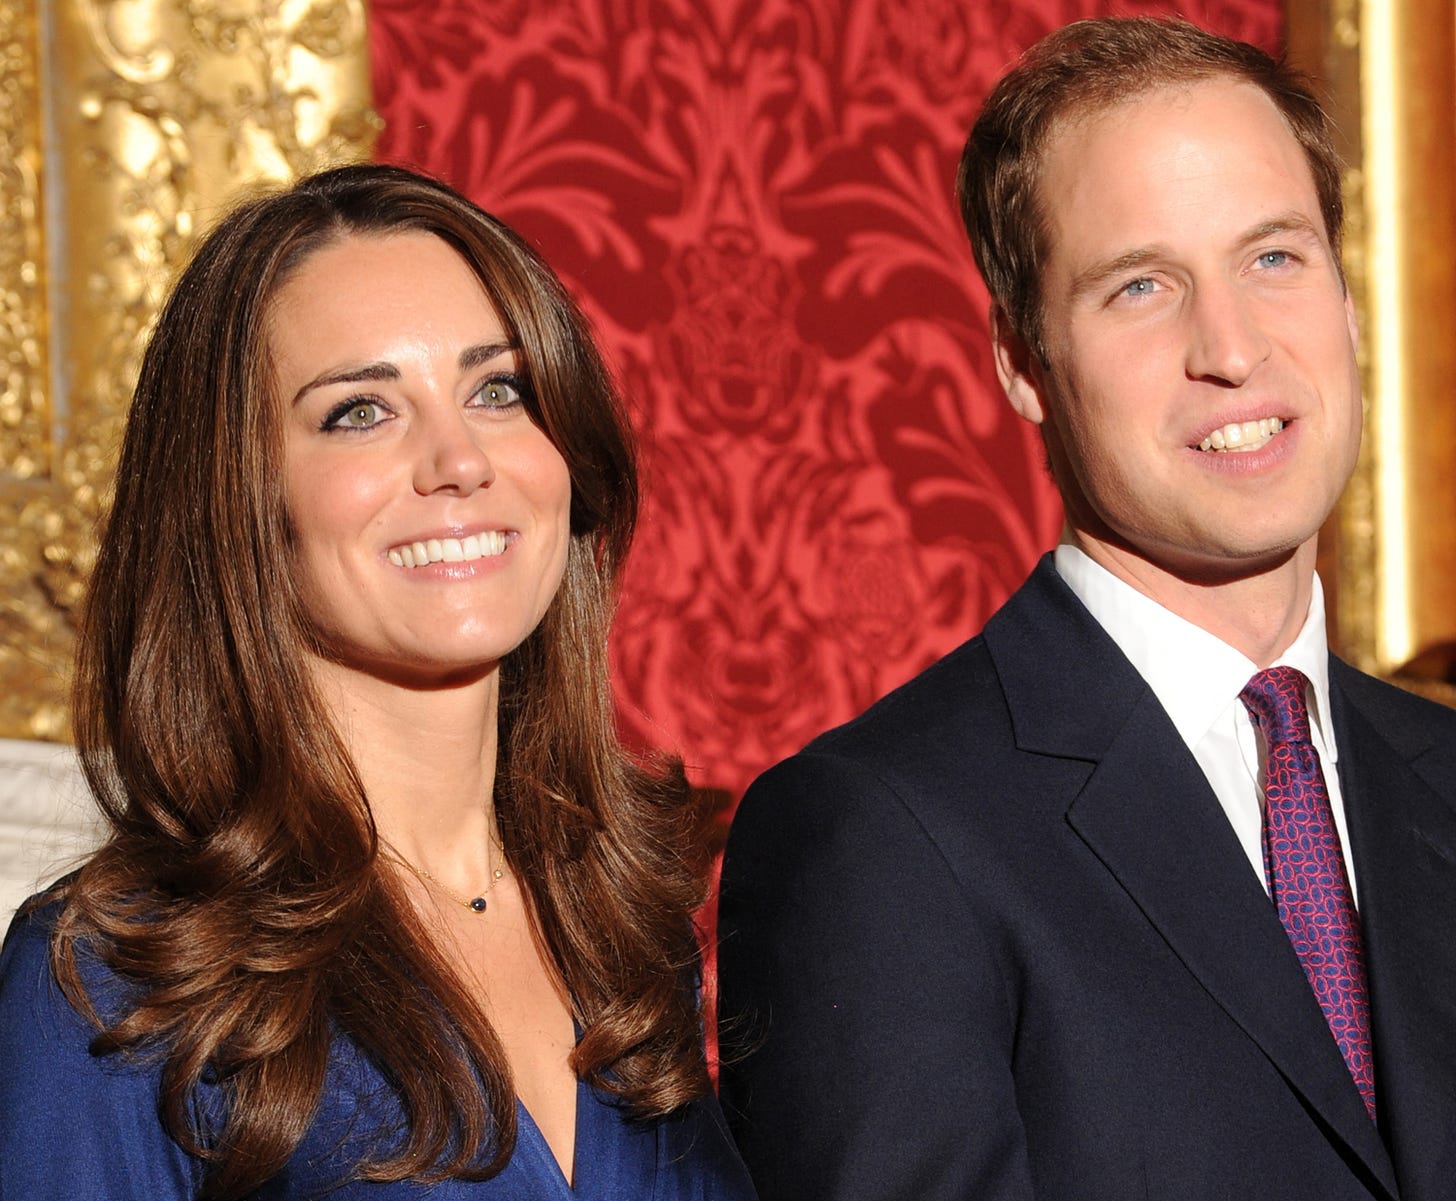 Smiling William and Kate at their engagement announcement